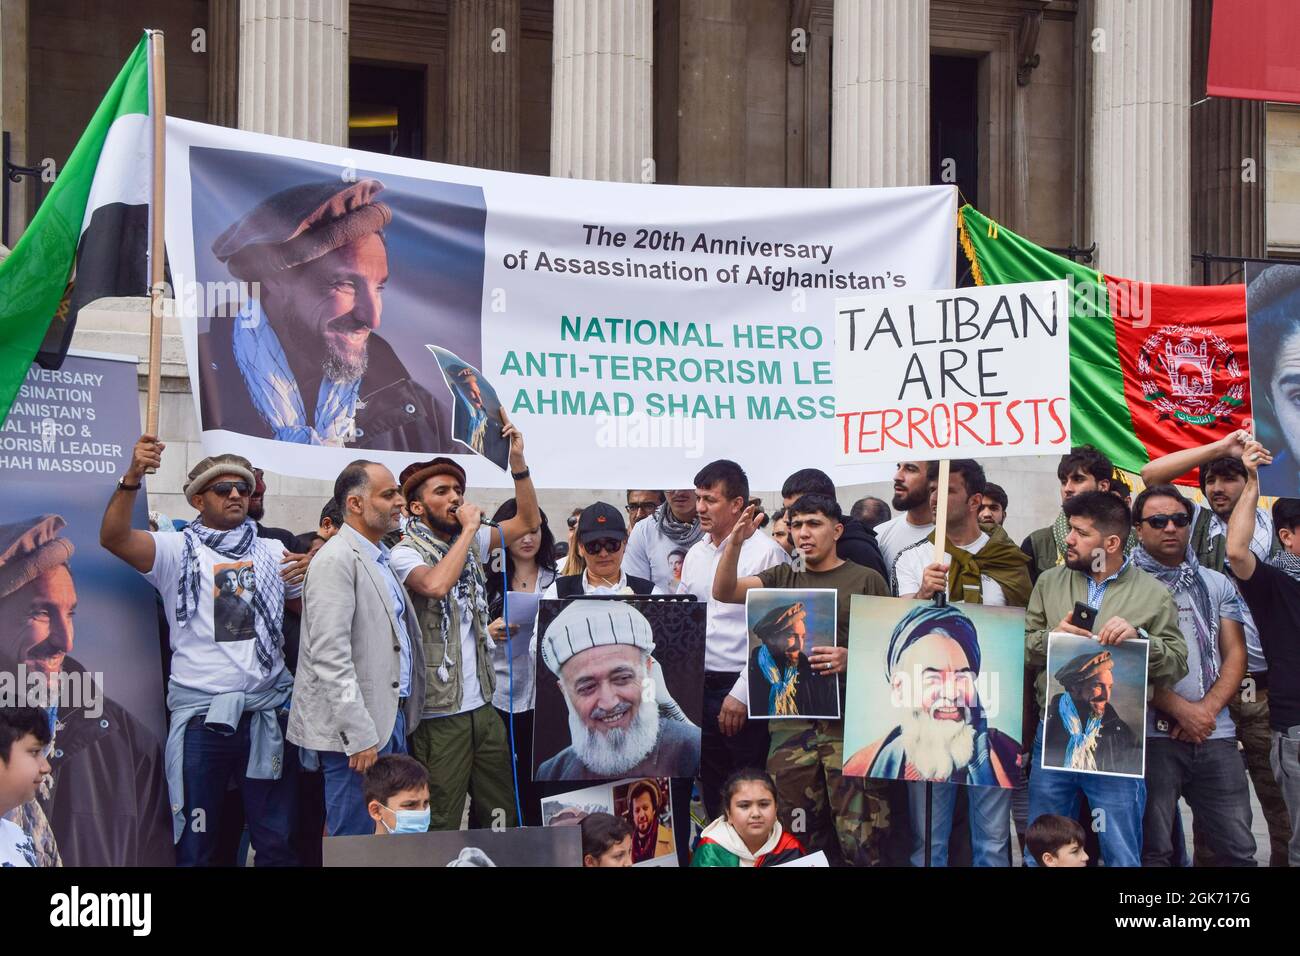 London, United Kingdom. 12th September 2021. Demonstrators gathered in Trafalgar Square on the 20th anniversary of the assassination of opposition commander Ahmad Shah Massoud, in protest against the Taliban takeover and to call on the UK and the international community to help Afghanistan. Stock Photo